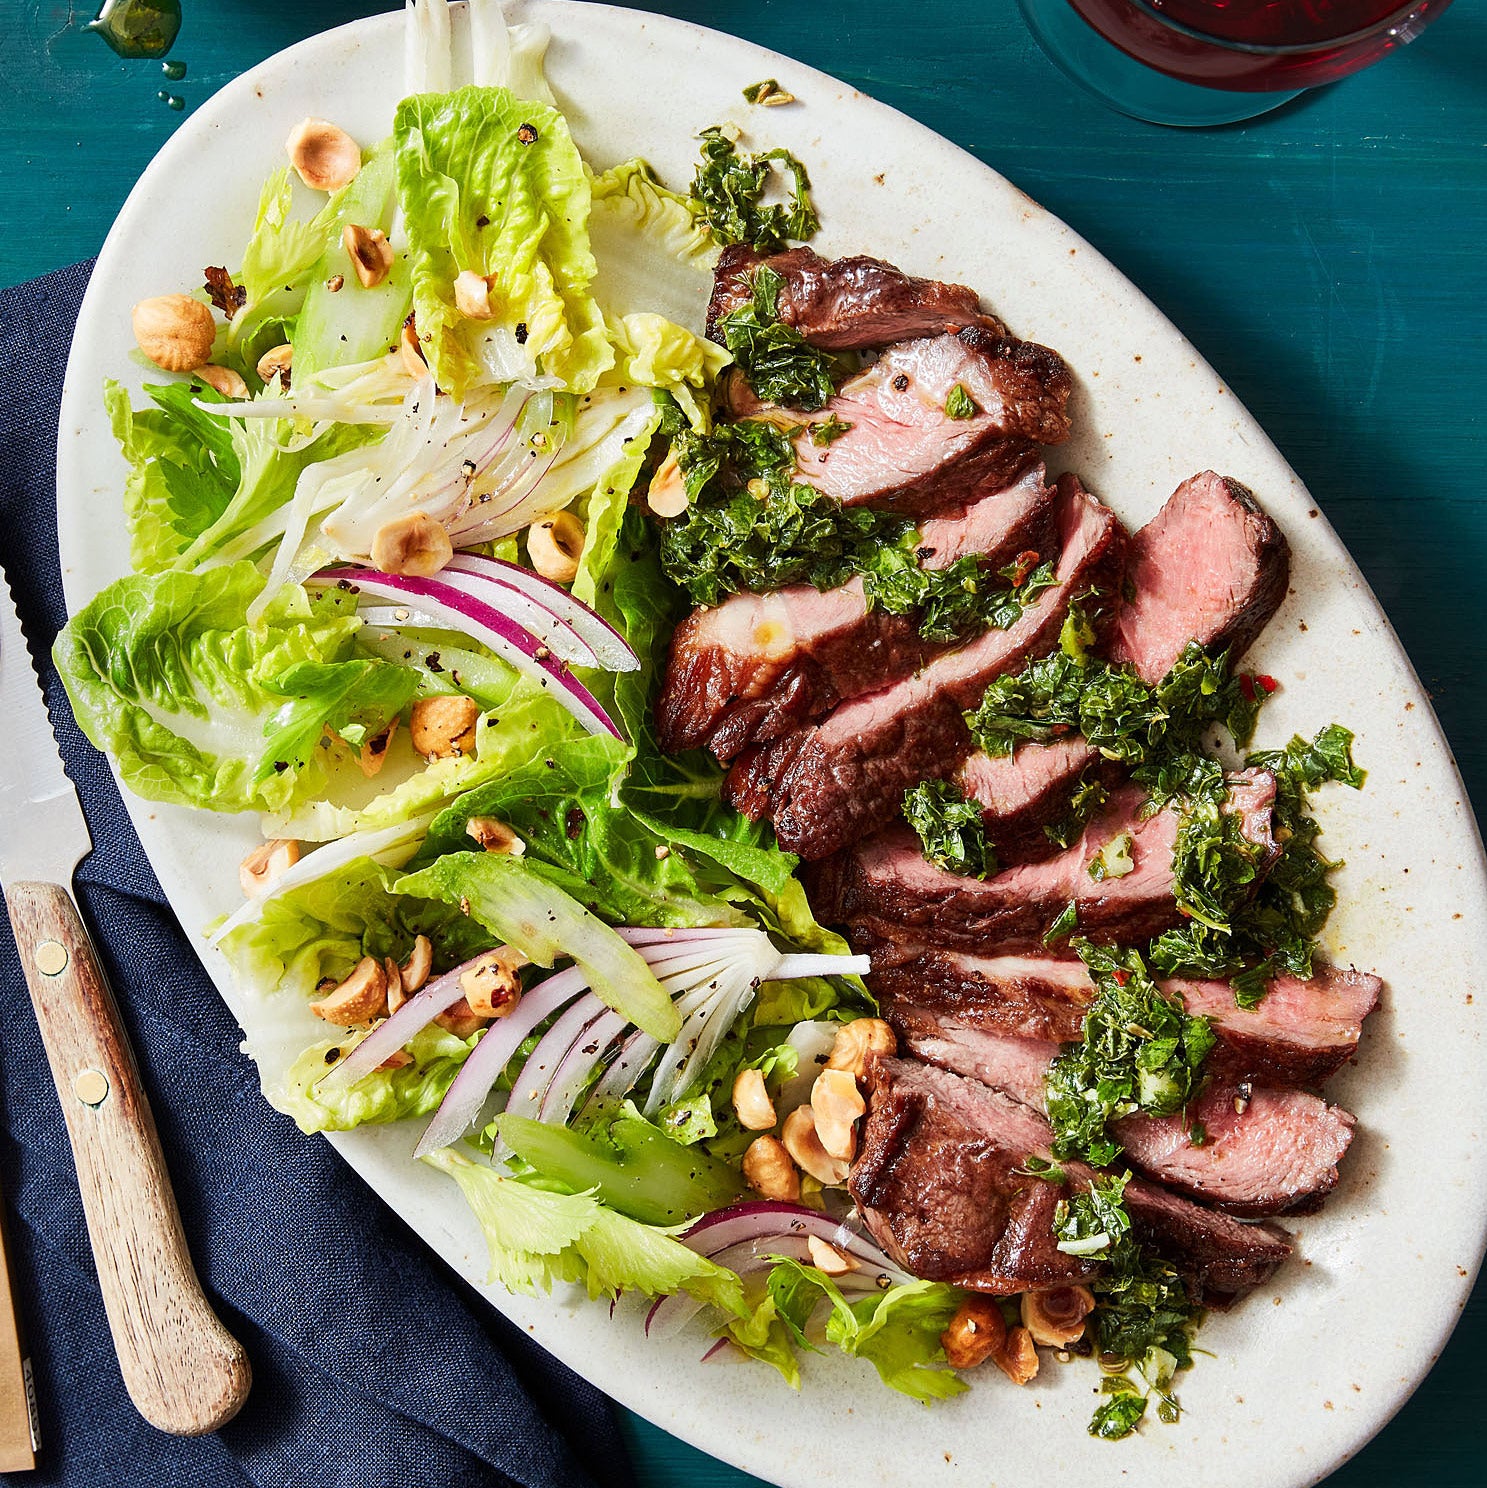 Rachael Ray's Steak, Chicken, or Fish with Winter Chimichurri